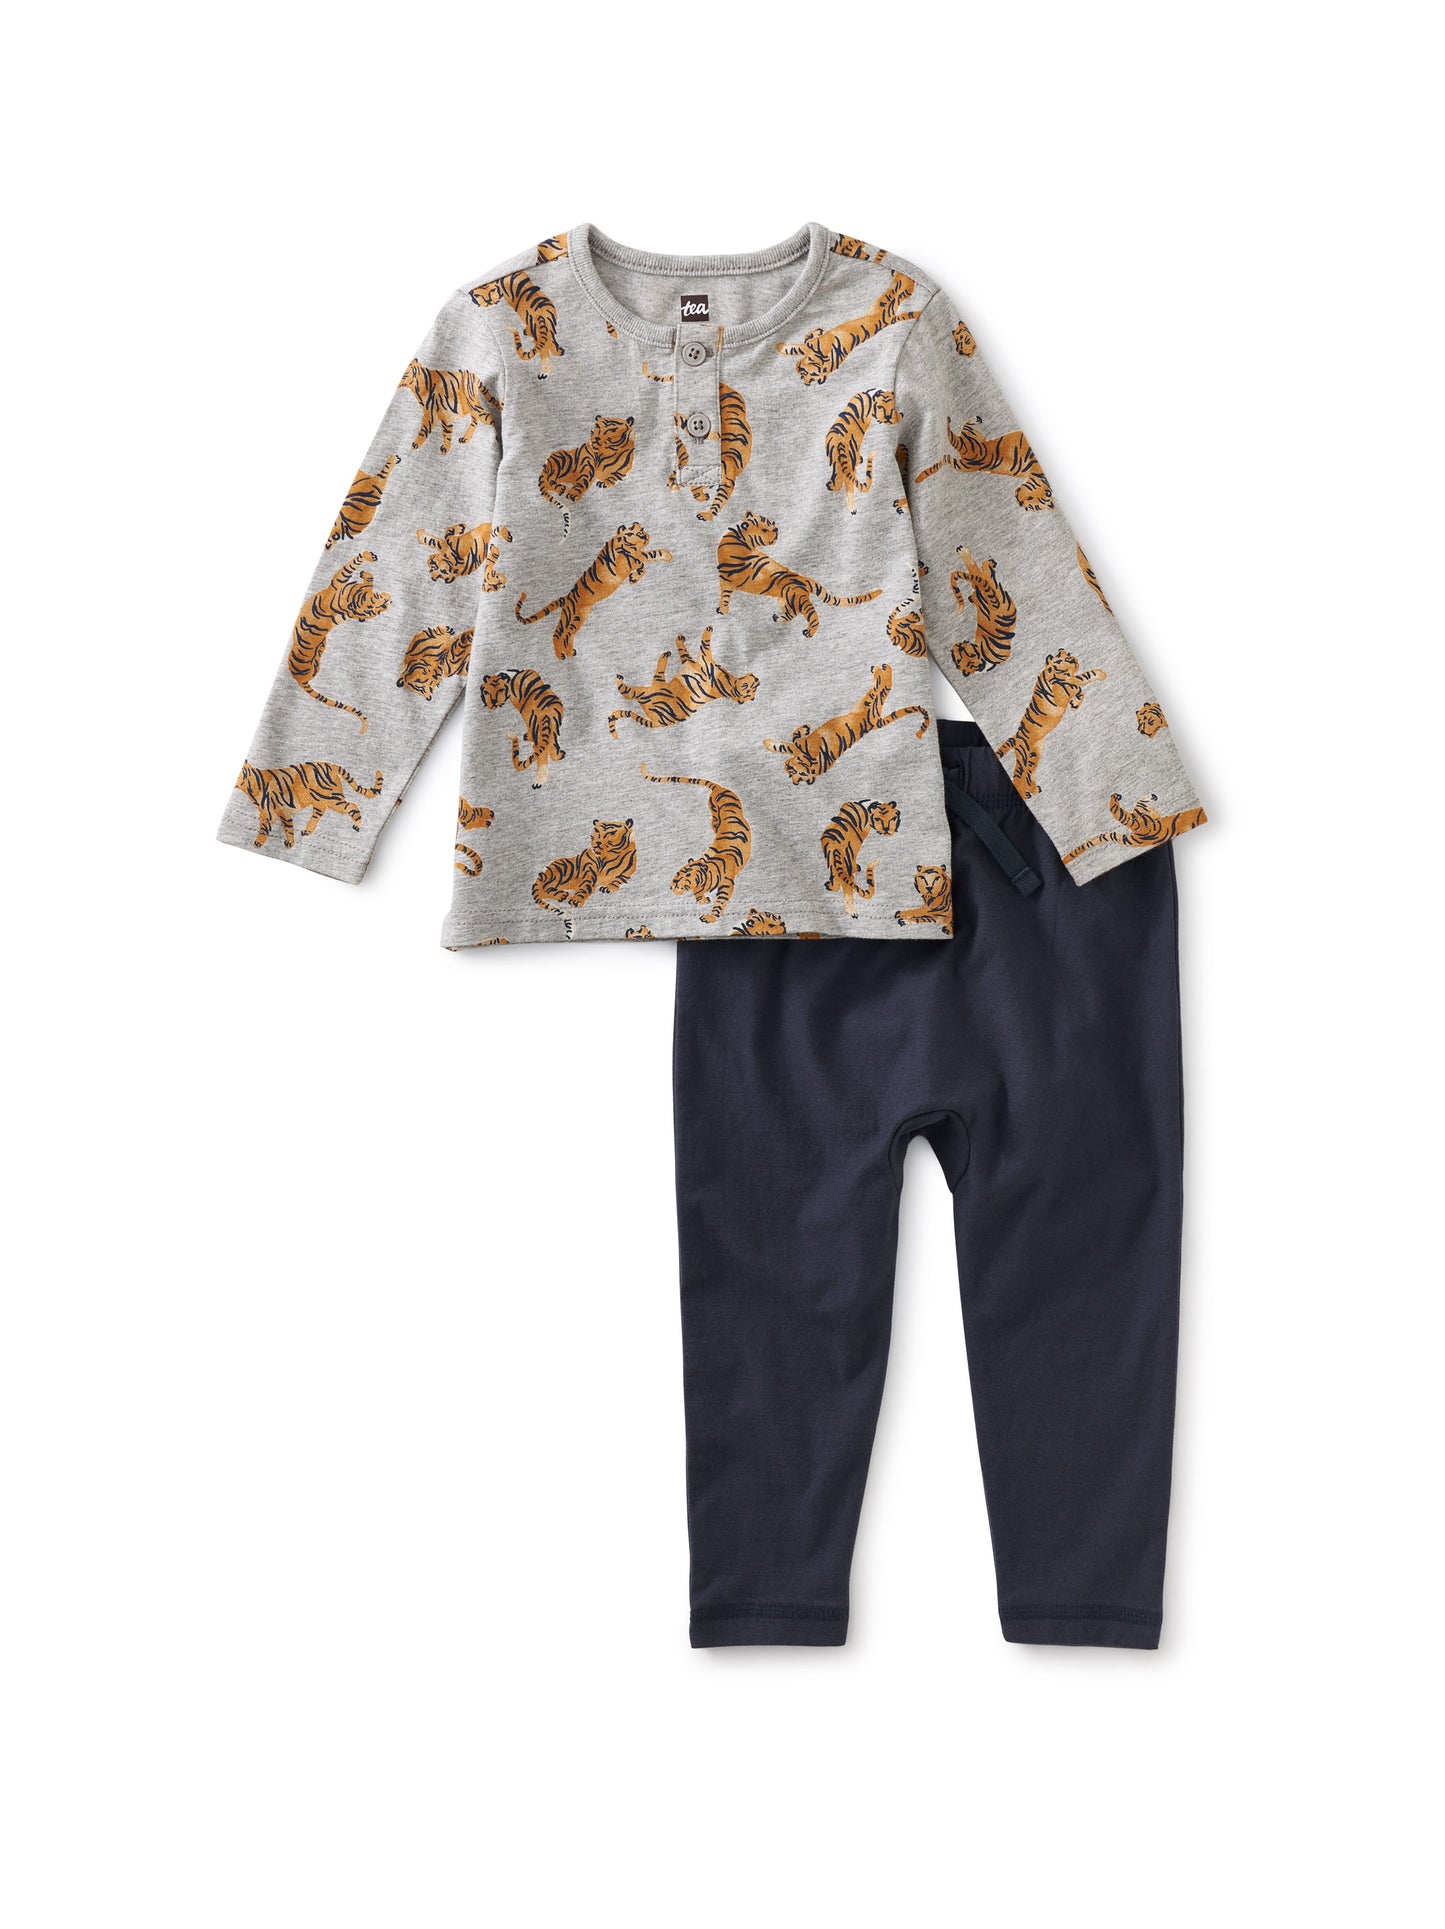 TEA COLLECTION HENLEY BABY SET - TOSSED TIGERS